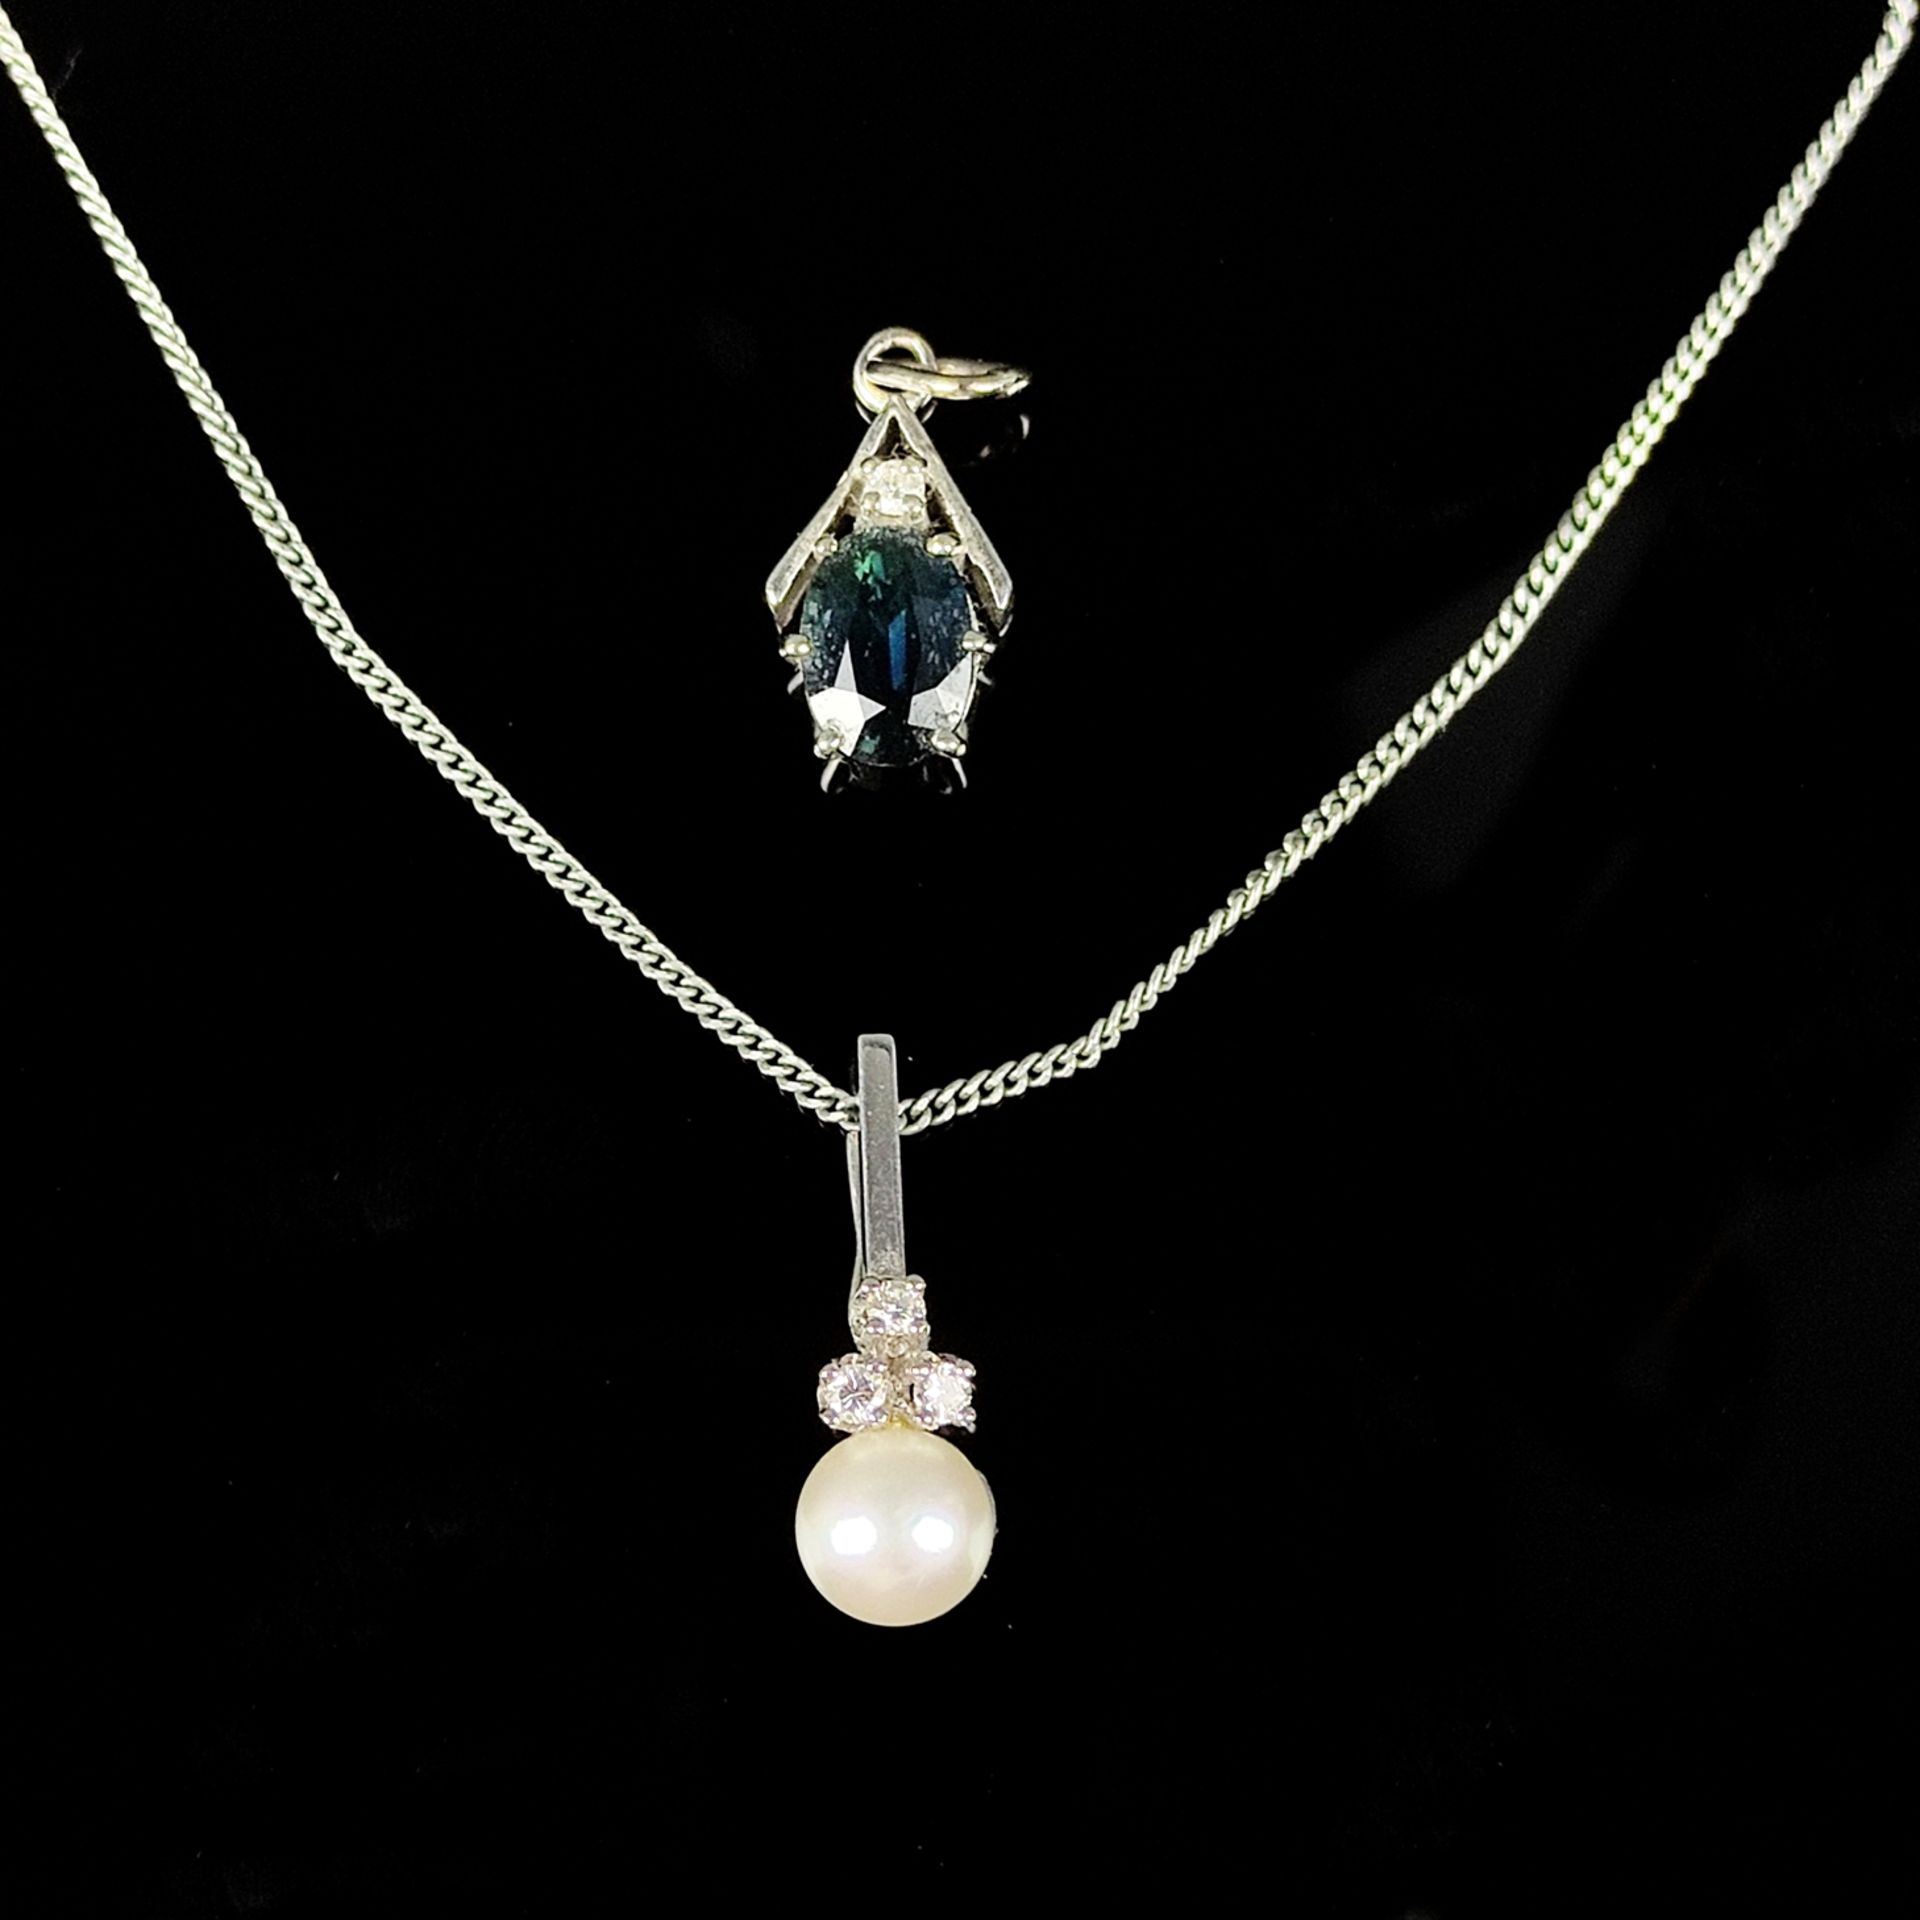 Two pendants and flat anchor chain, 3 pieces, pearl pendant with three diamond roses, 585/14K white